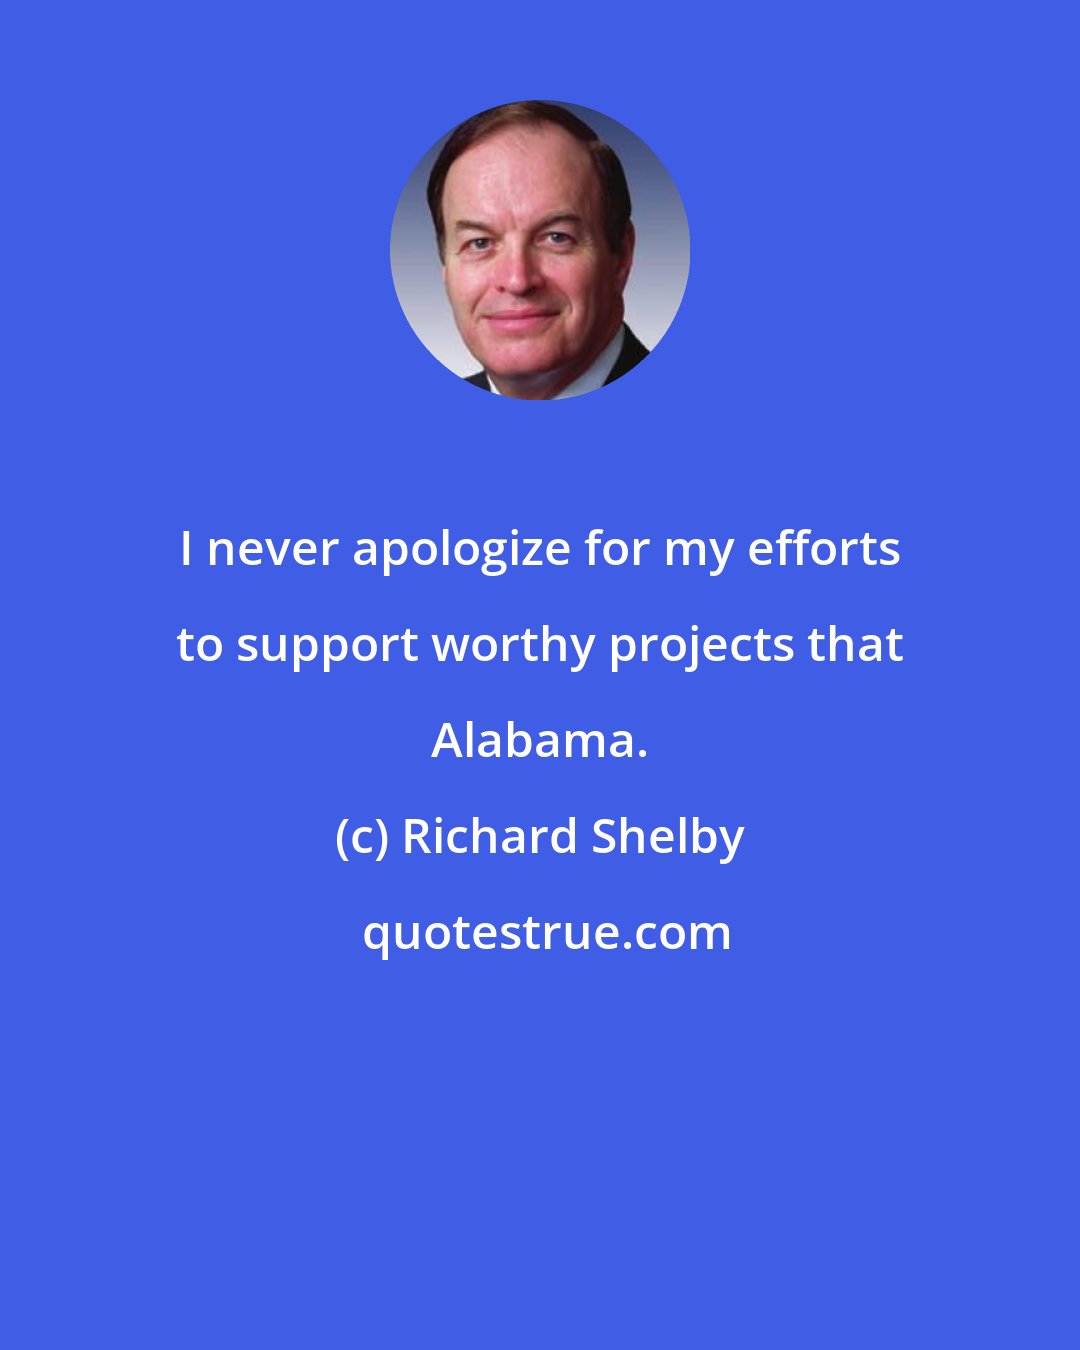 Richard Shelby: I never apologize for my efforts to support worthy projects that Alabama.